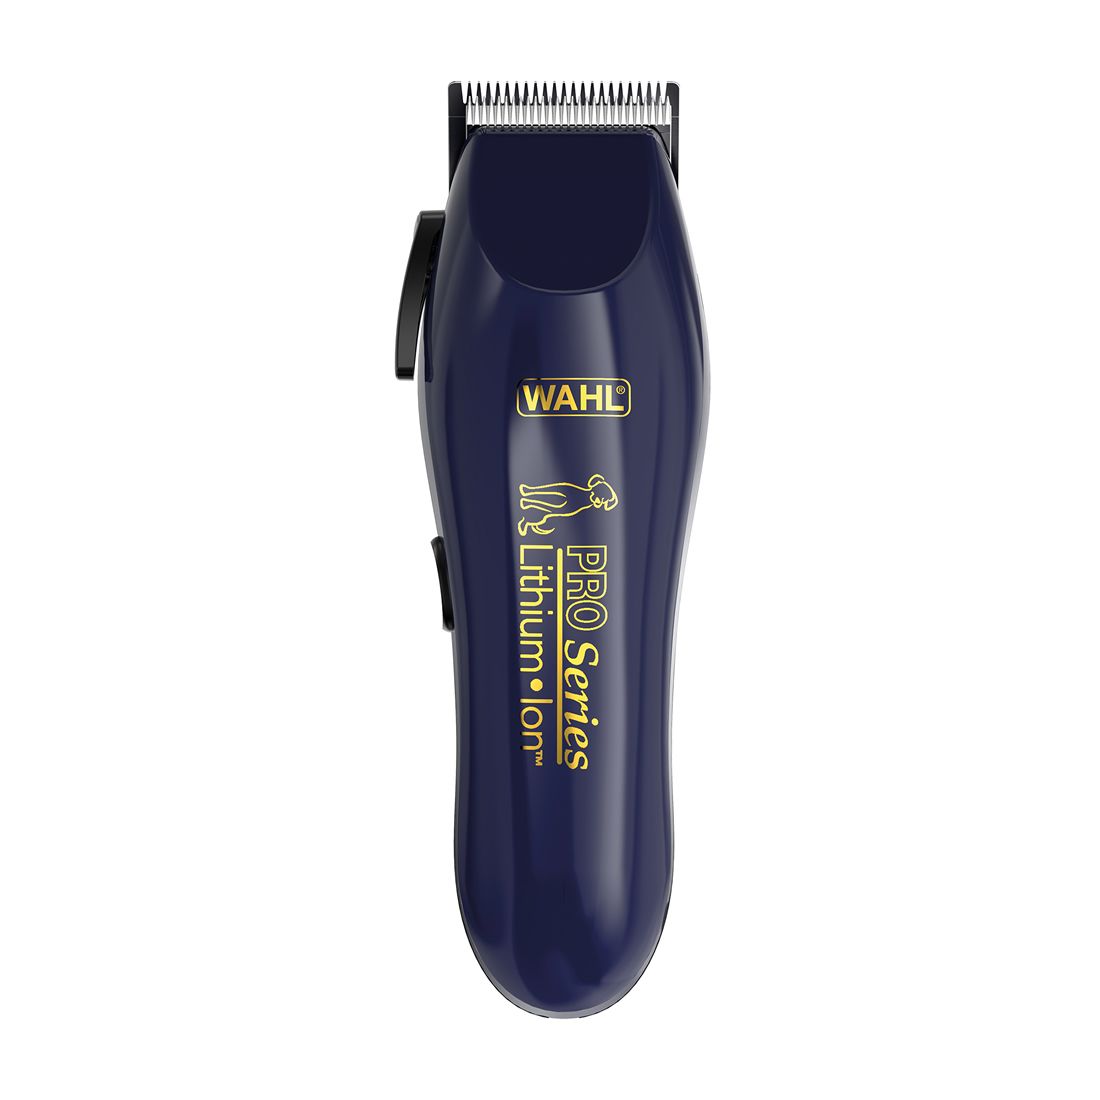 wahl pet clippers uk